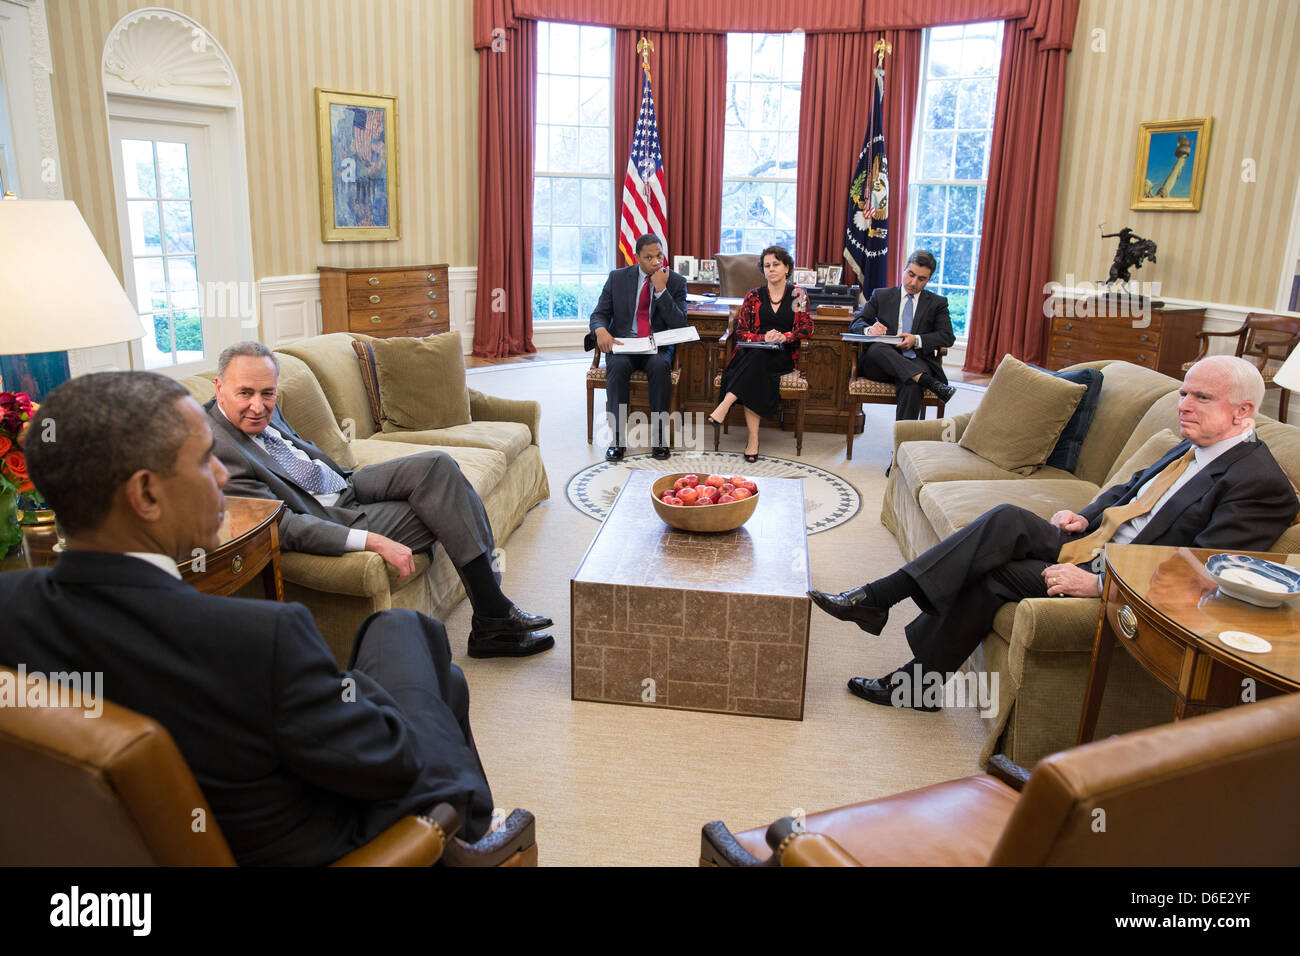 President Barack Obama meets with Sen. Chuck Schumer, left, and Sen. John McCain, to discuss immigration reform in the Oval Office of the White House. Also attending, from left, are: Rob Nabors, Deputy Chief of Staff for Policy; Cecilia Muñoz, Director of the Domestic Policy Council; and Miguel Rodriguez, Director of Legislative Affairs. Stock Photo